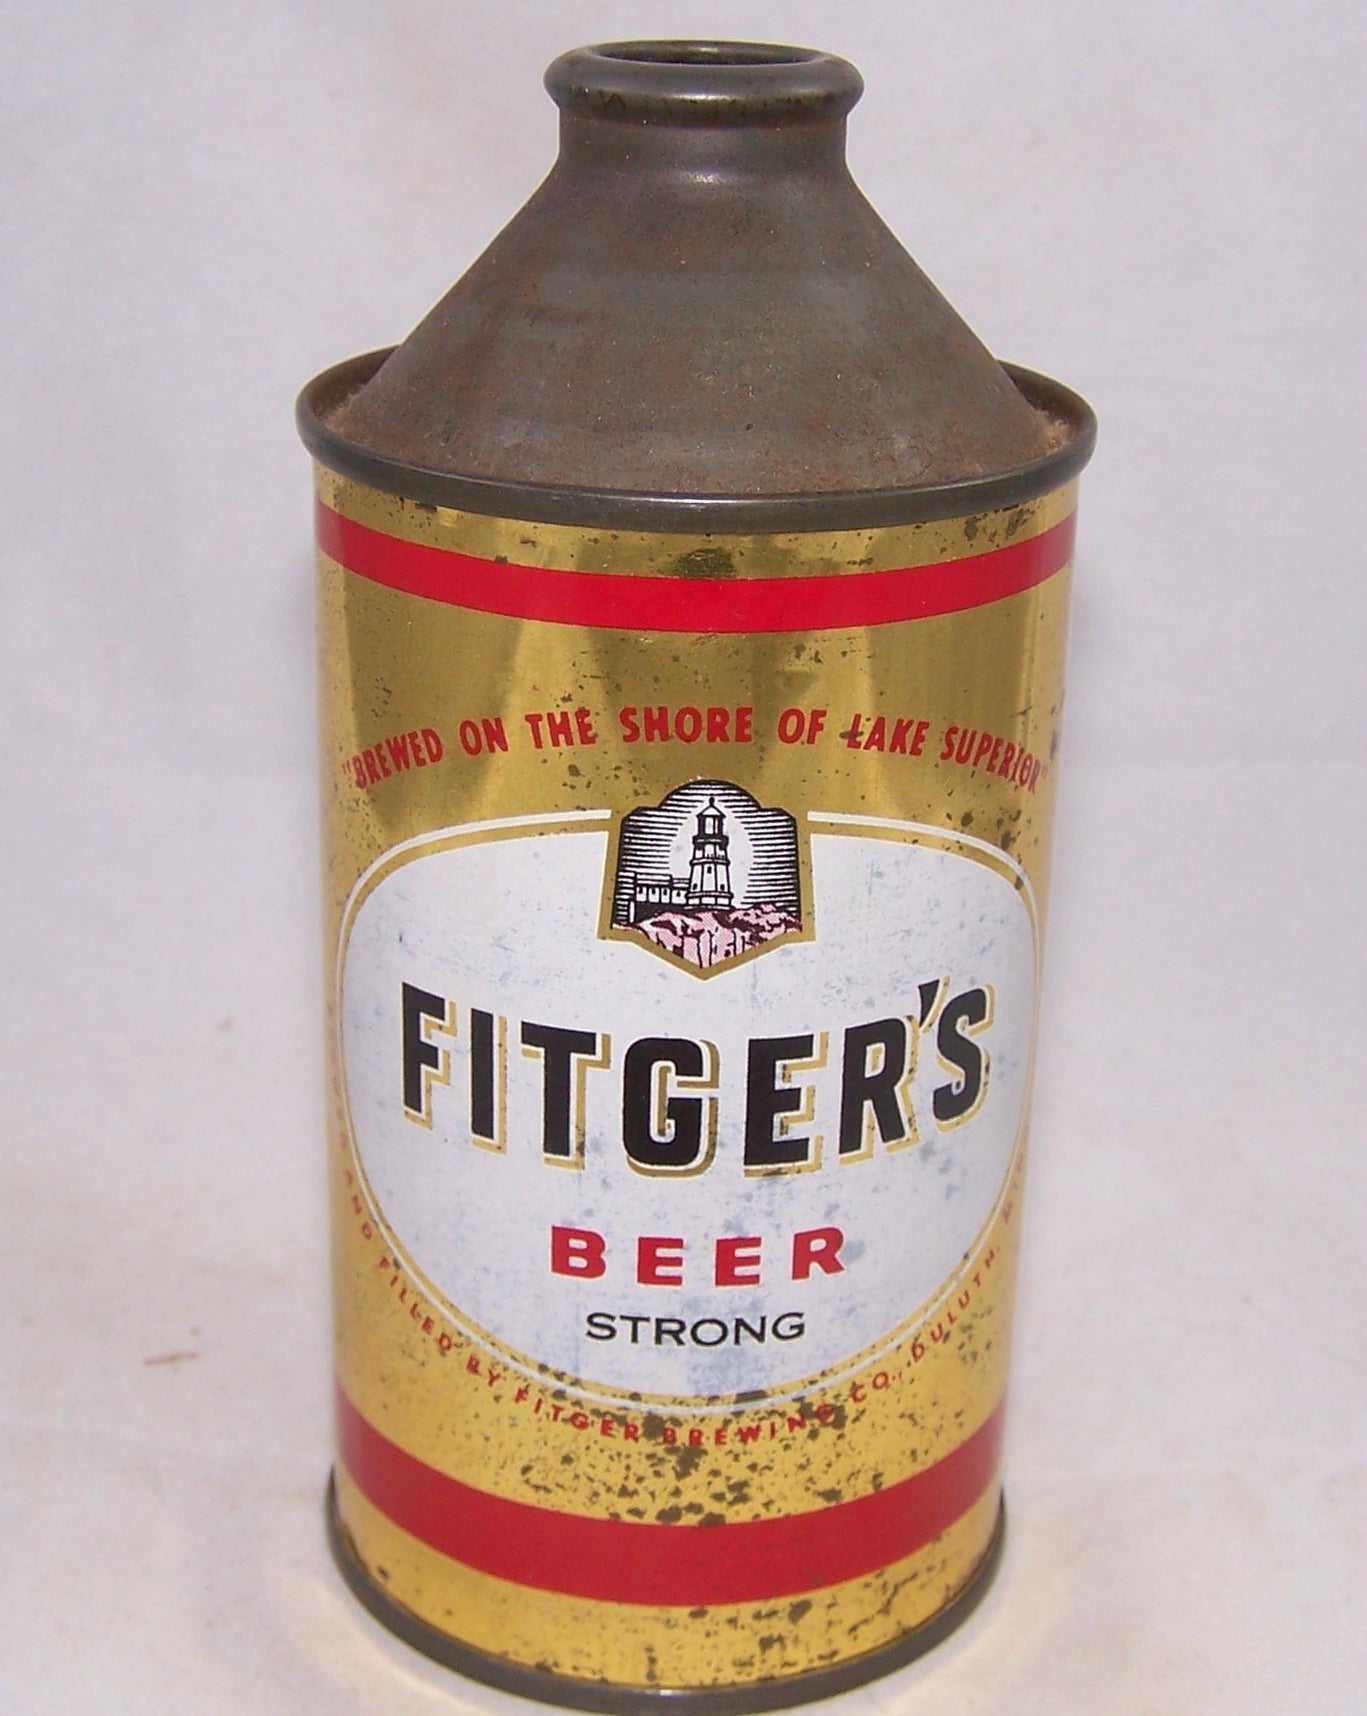 Fitger's Strong Beer, USBC 162-23, Grade 1- Sold on 11/05/18